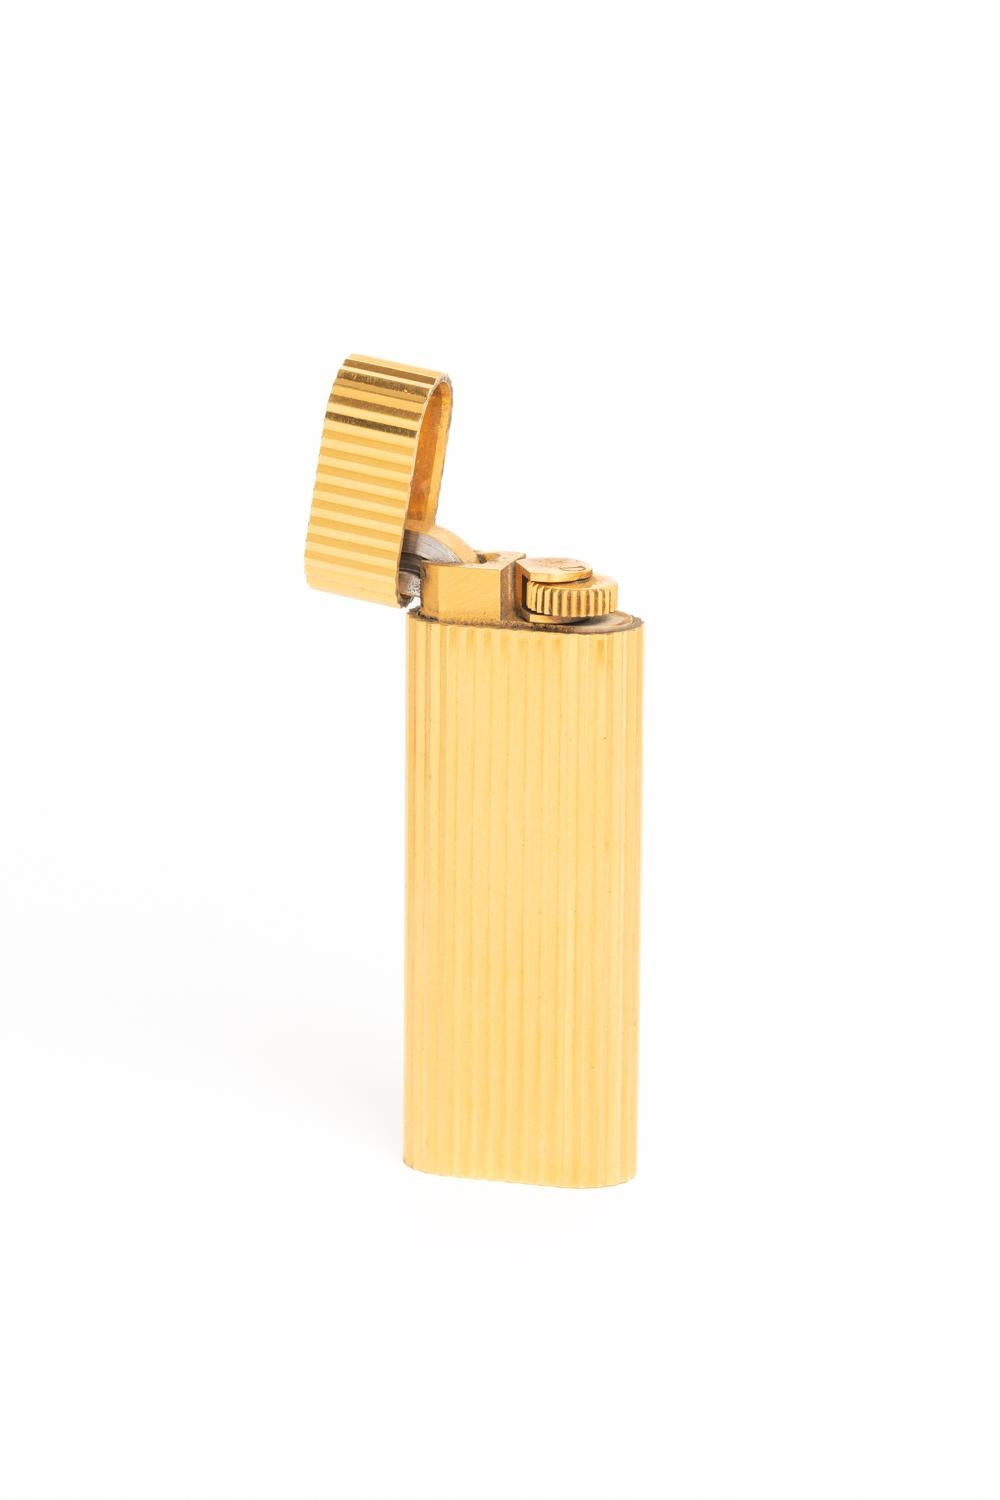 Classic and elegant Must De Cartier Stripe Gold Plated Lighter with original red Cartier pouch, Cartier extractor + instruction booklet for lighters. The bottom of the lighter is stamped 'Cartier', 'Paris', and 'SWISS MADE' with serial number: